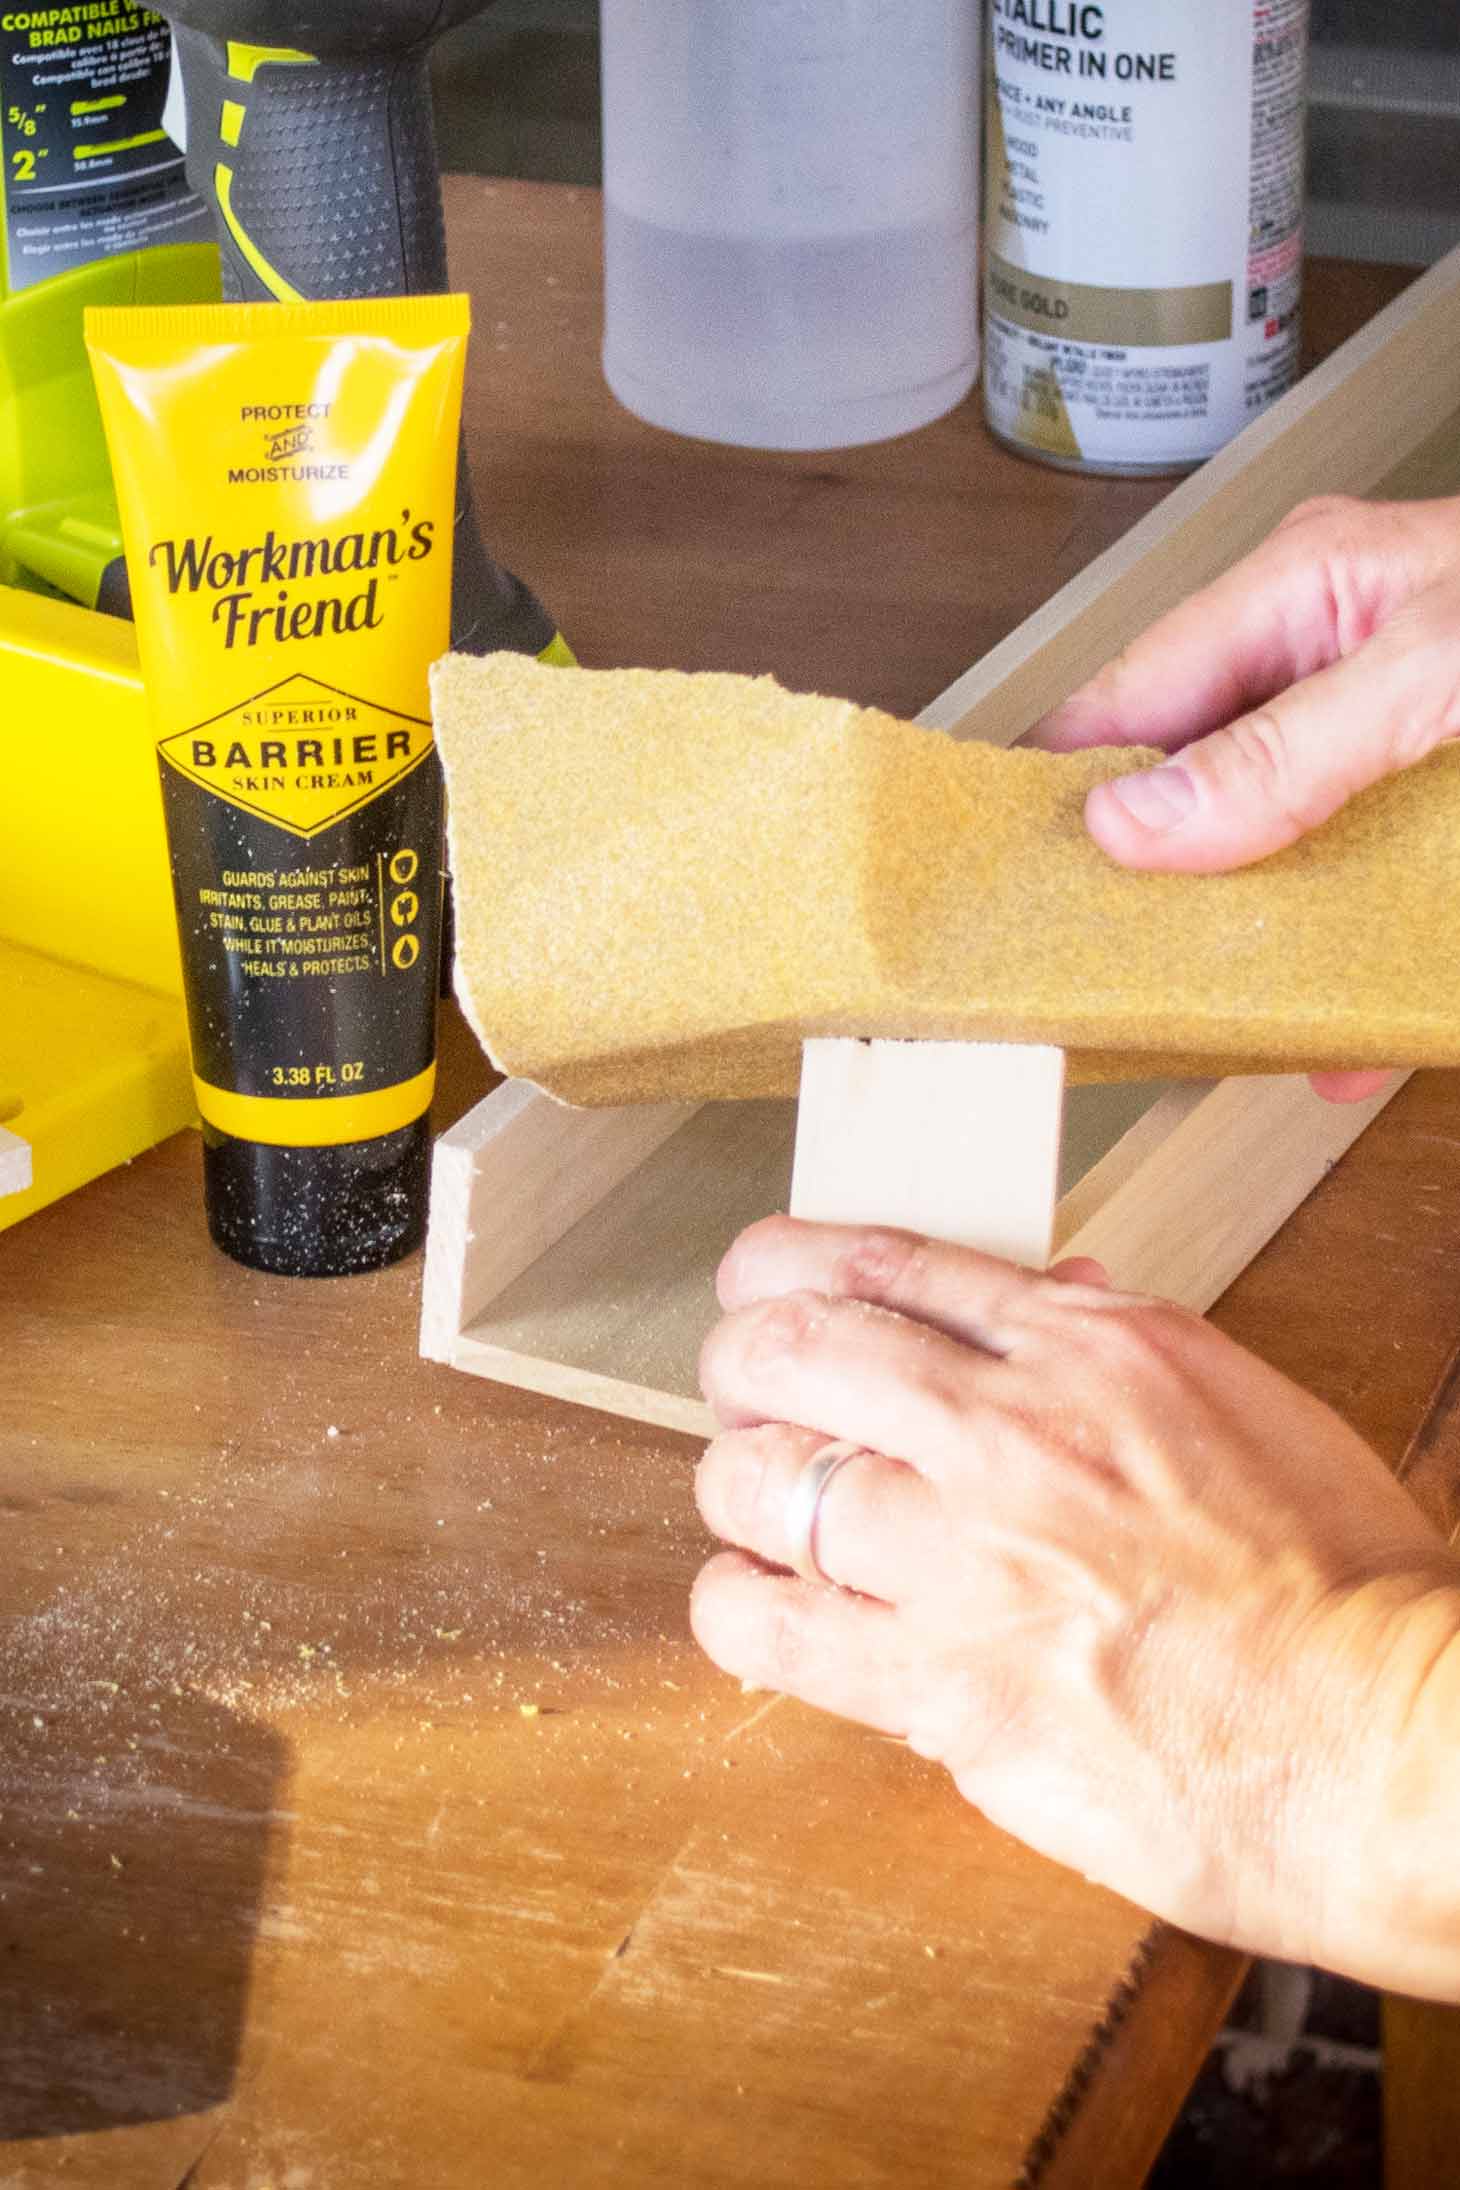 Prevent saw dust from sticking to hands with workman's friend!